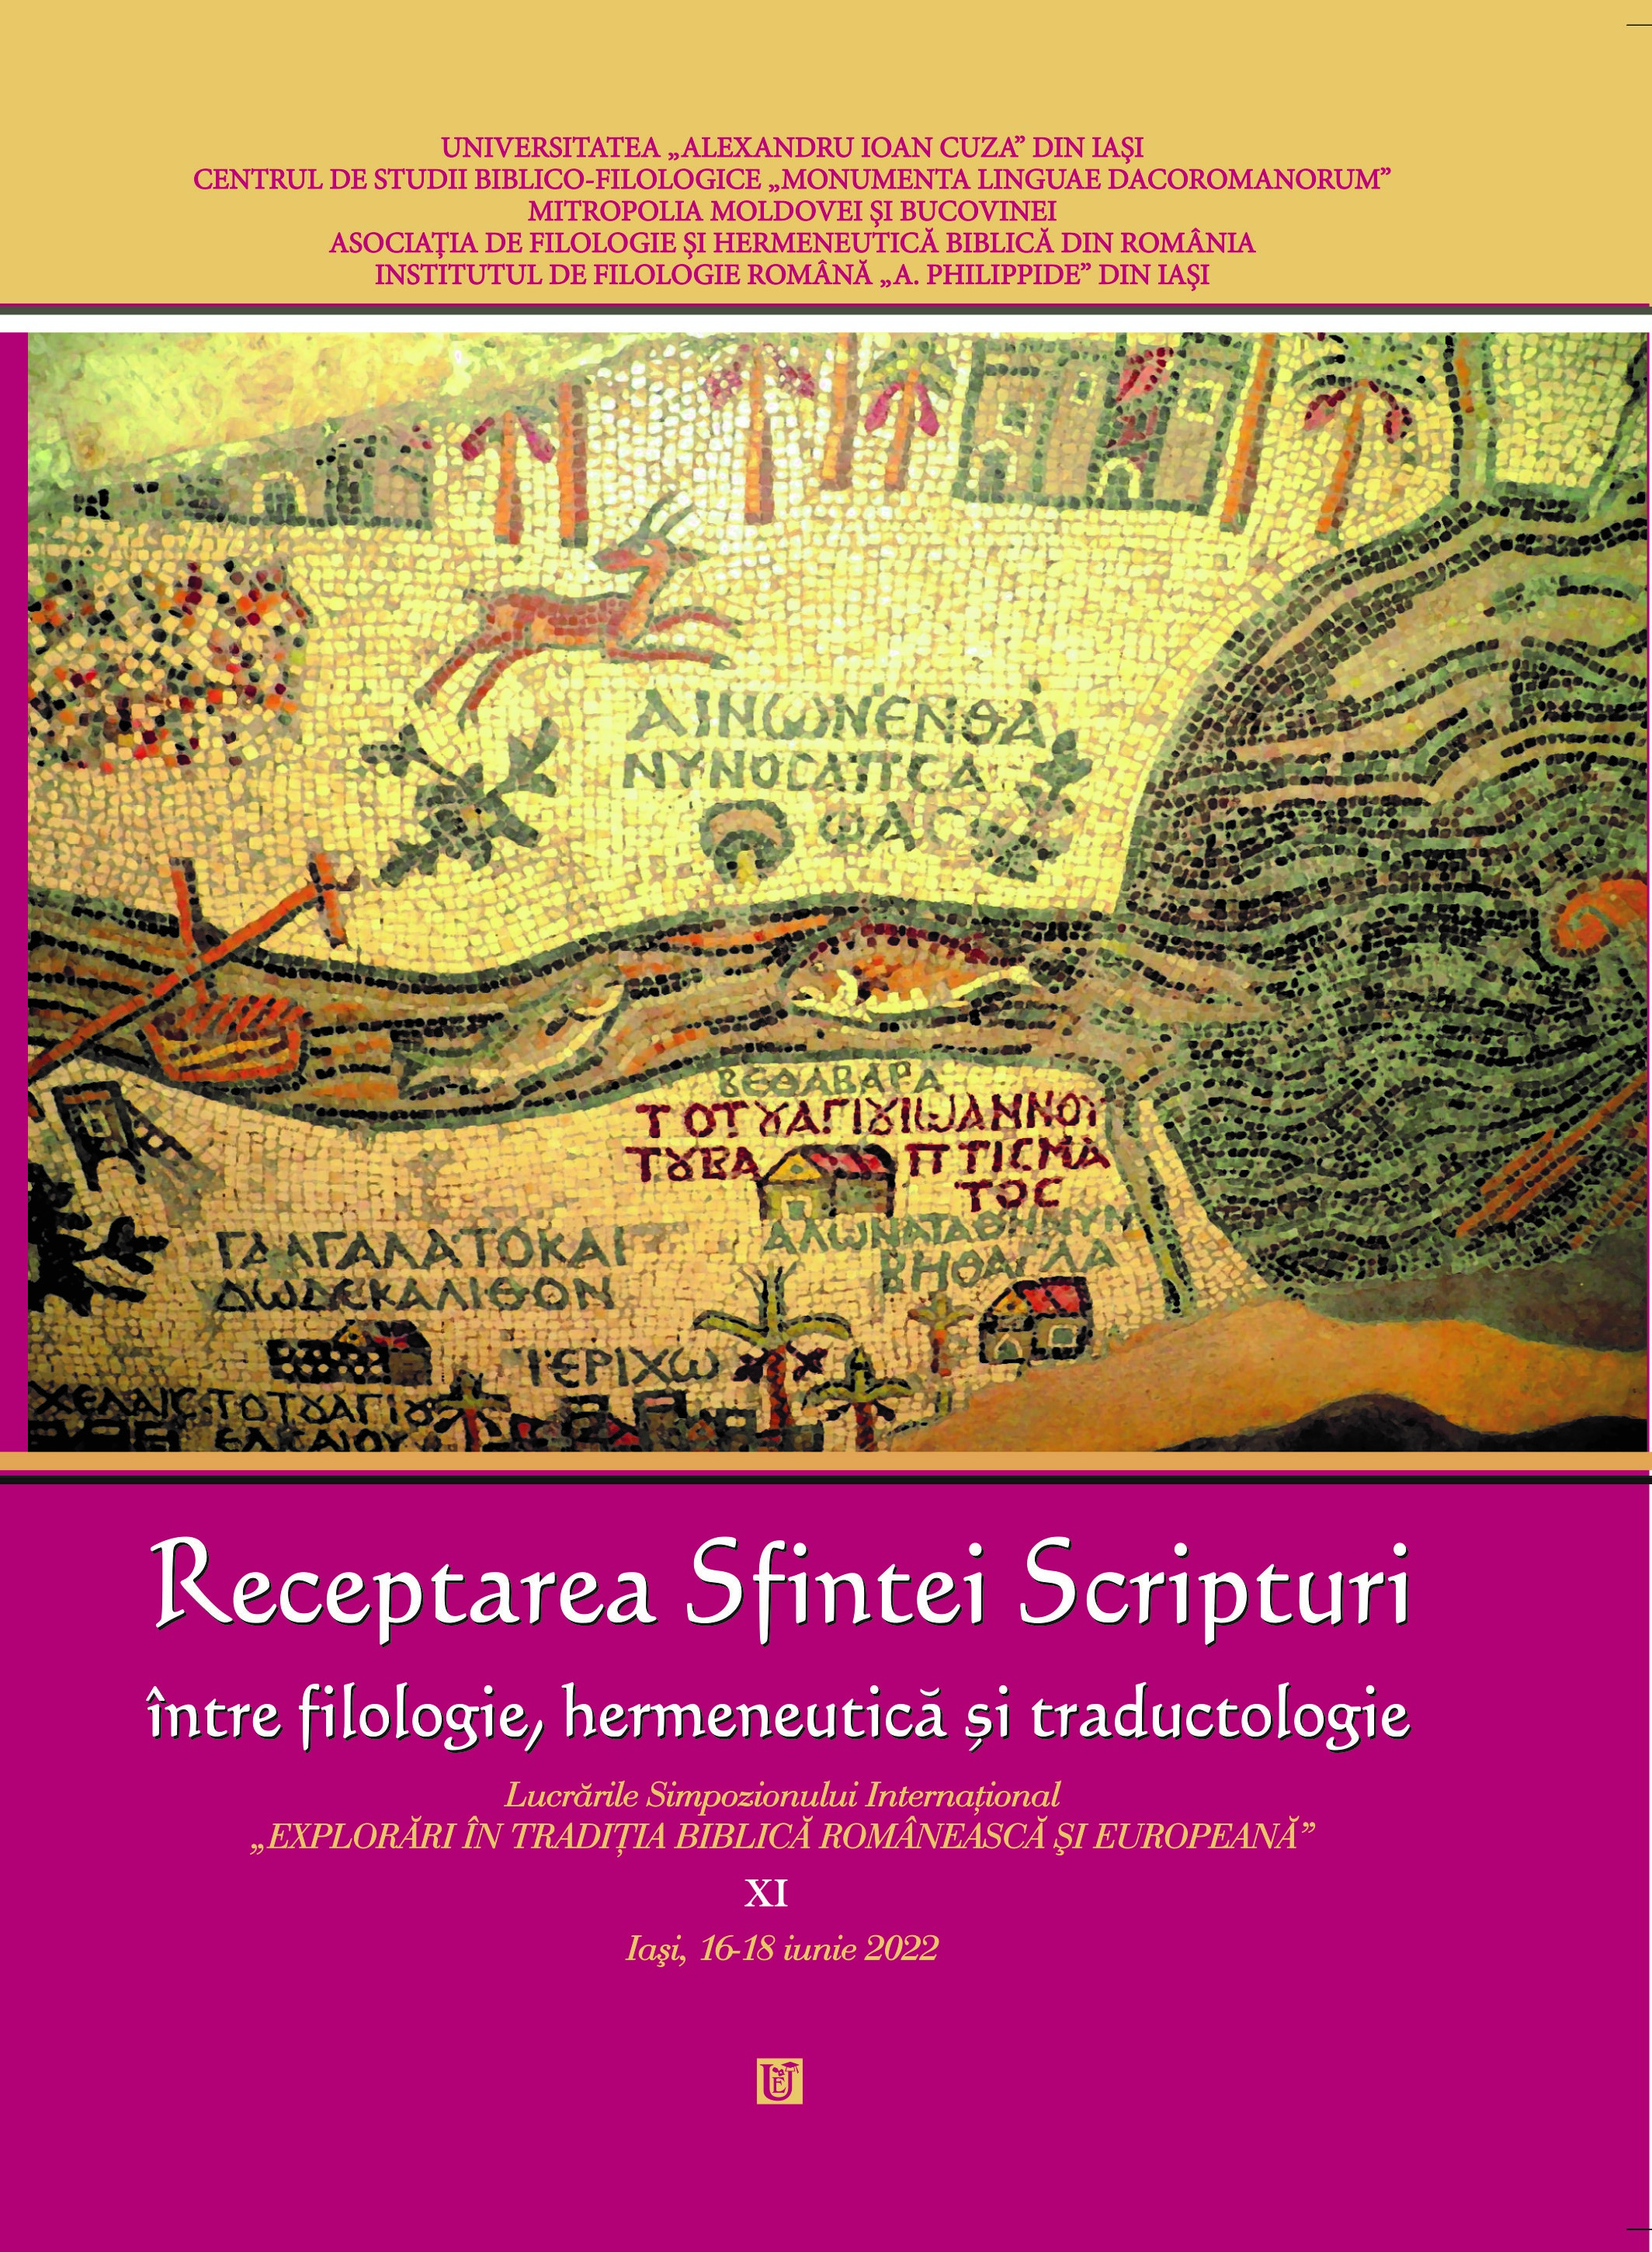 The anger in Ps. 4:4 (5), an inspired translation by the Septuagint Cover Image